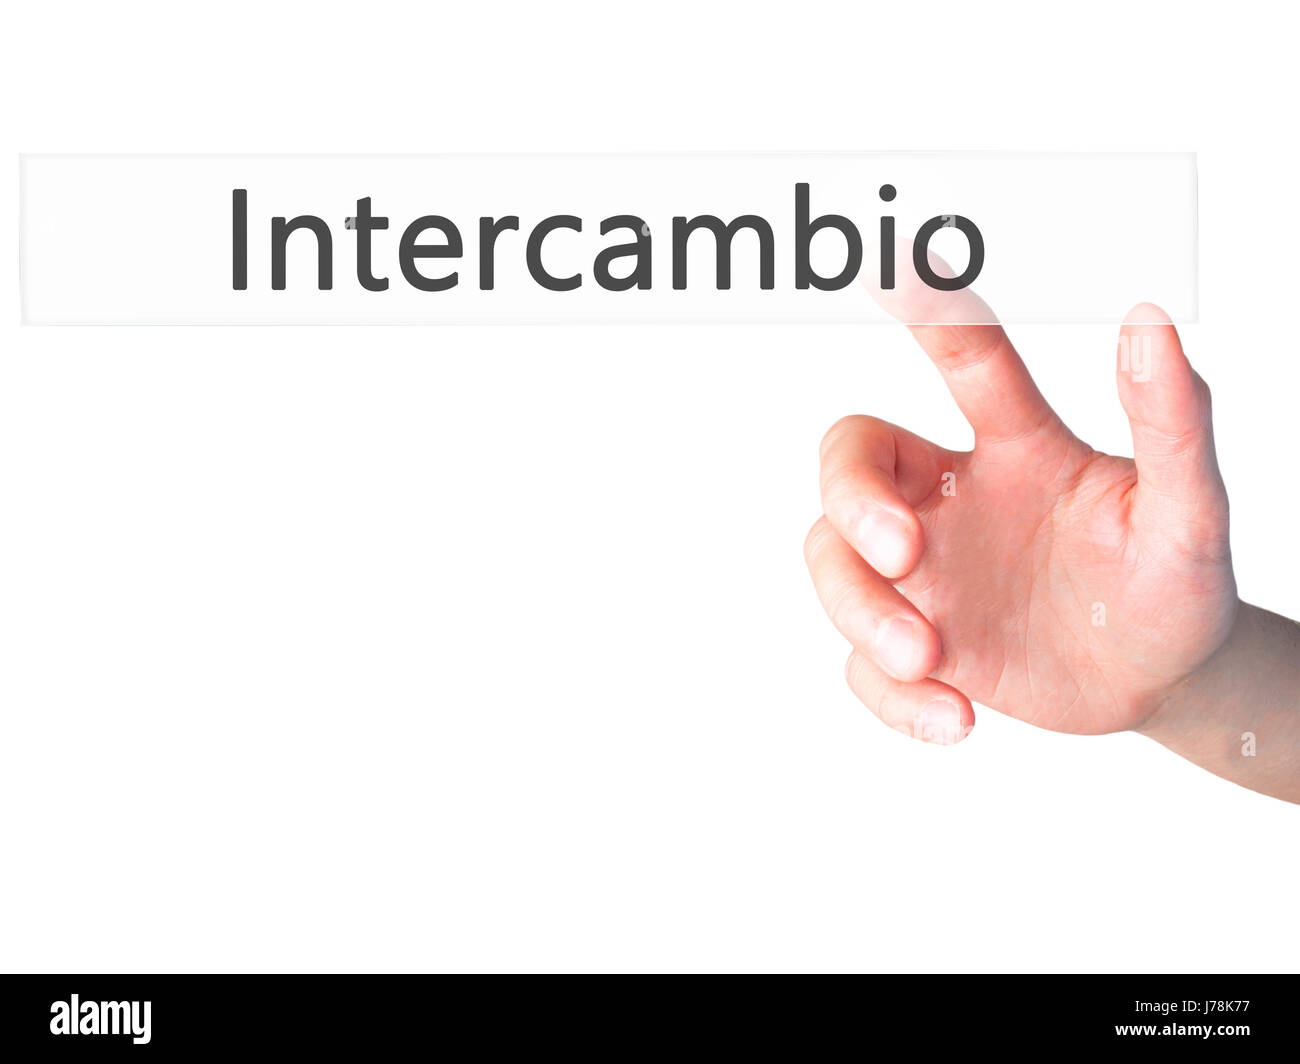 Intercambio (In portuguese - Student Exchange Program)  - Hand pressing a button on blurred background concept . Business, technology, internet concep Stock Photo